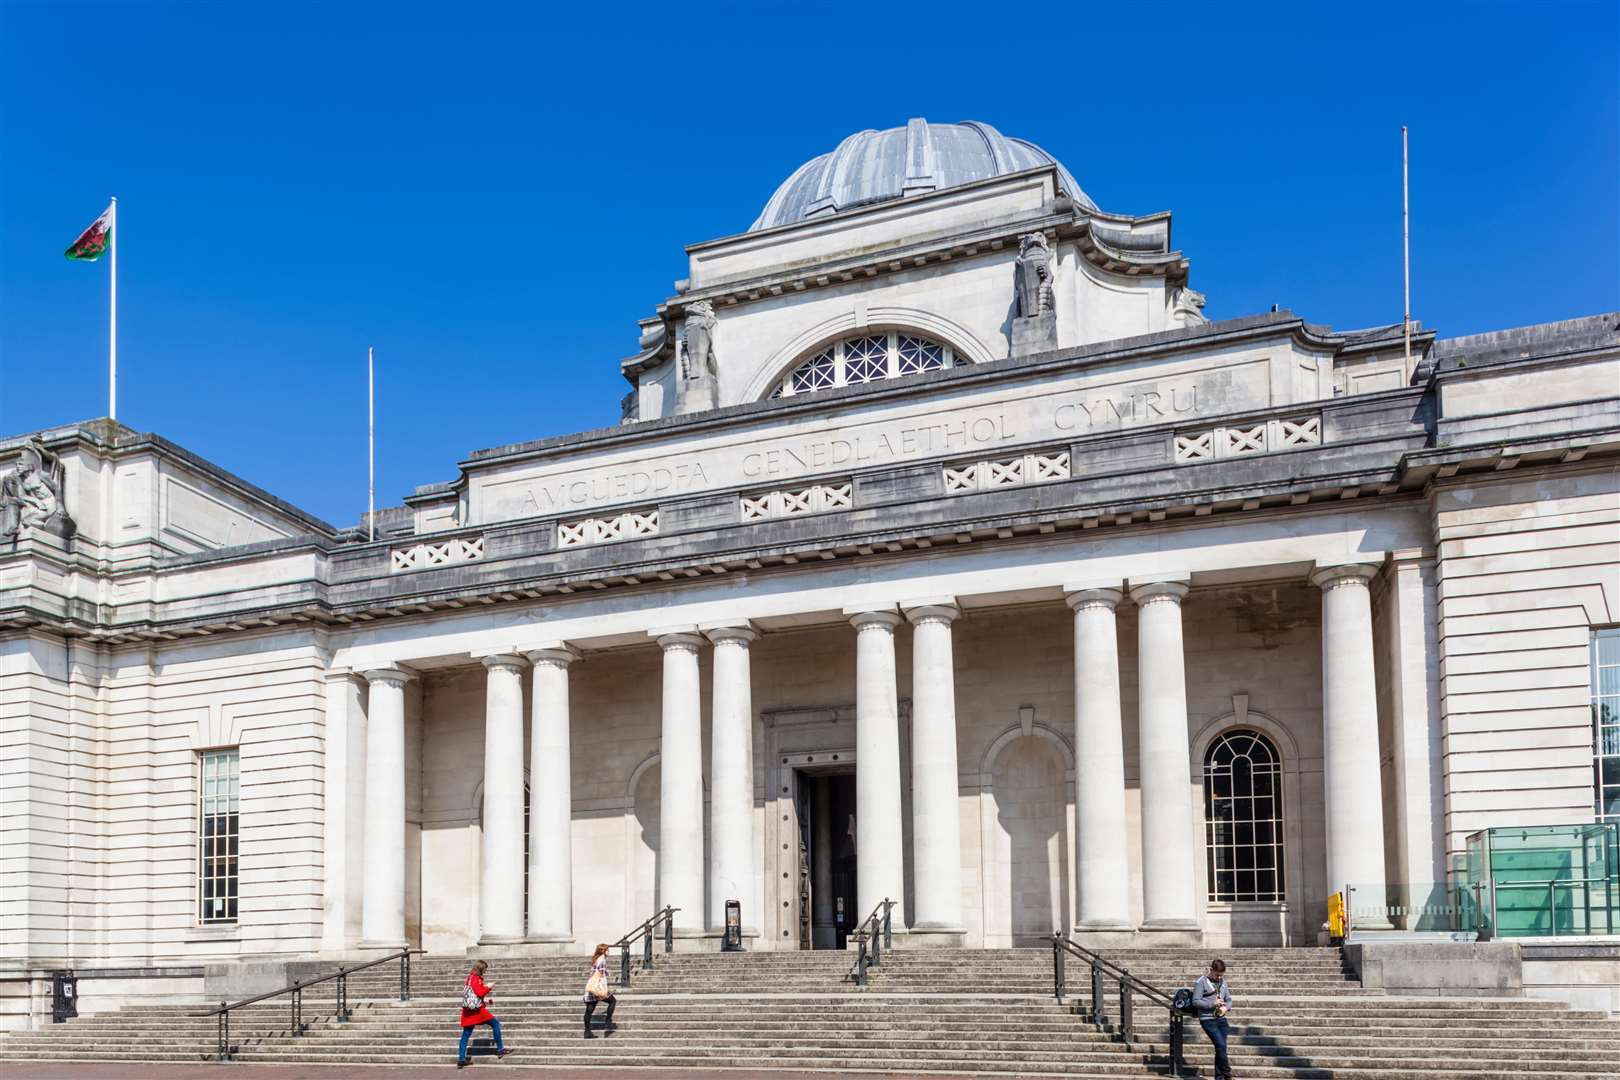 National Museum Cardiff is one of seven sites managed by Museum Wales (Alamy/PA)